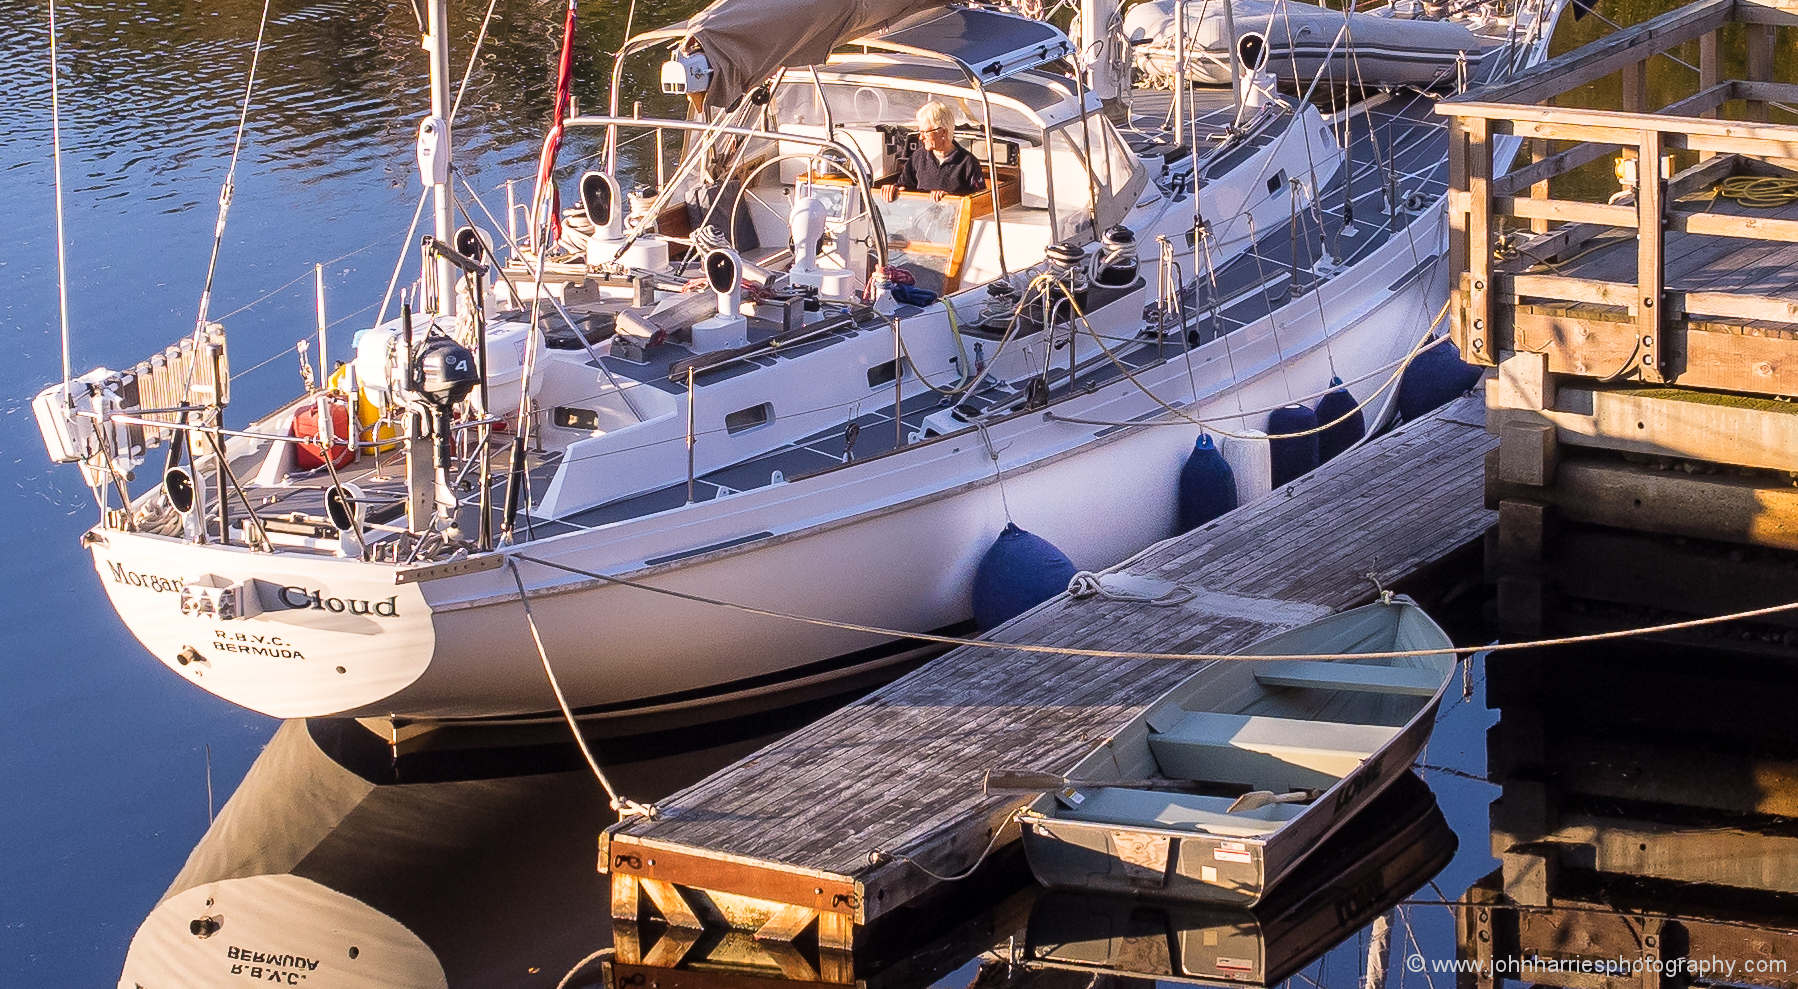 10 Ways to Make Your Boat Easier to Bring Alongside a Dock